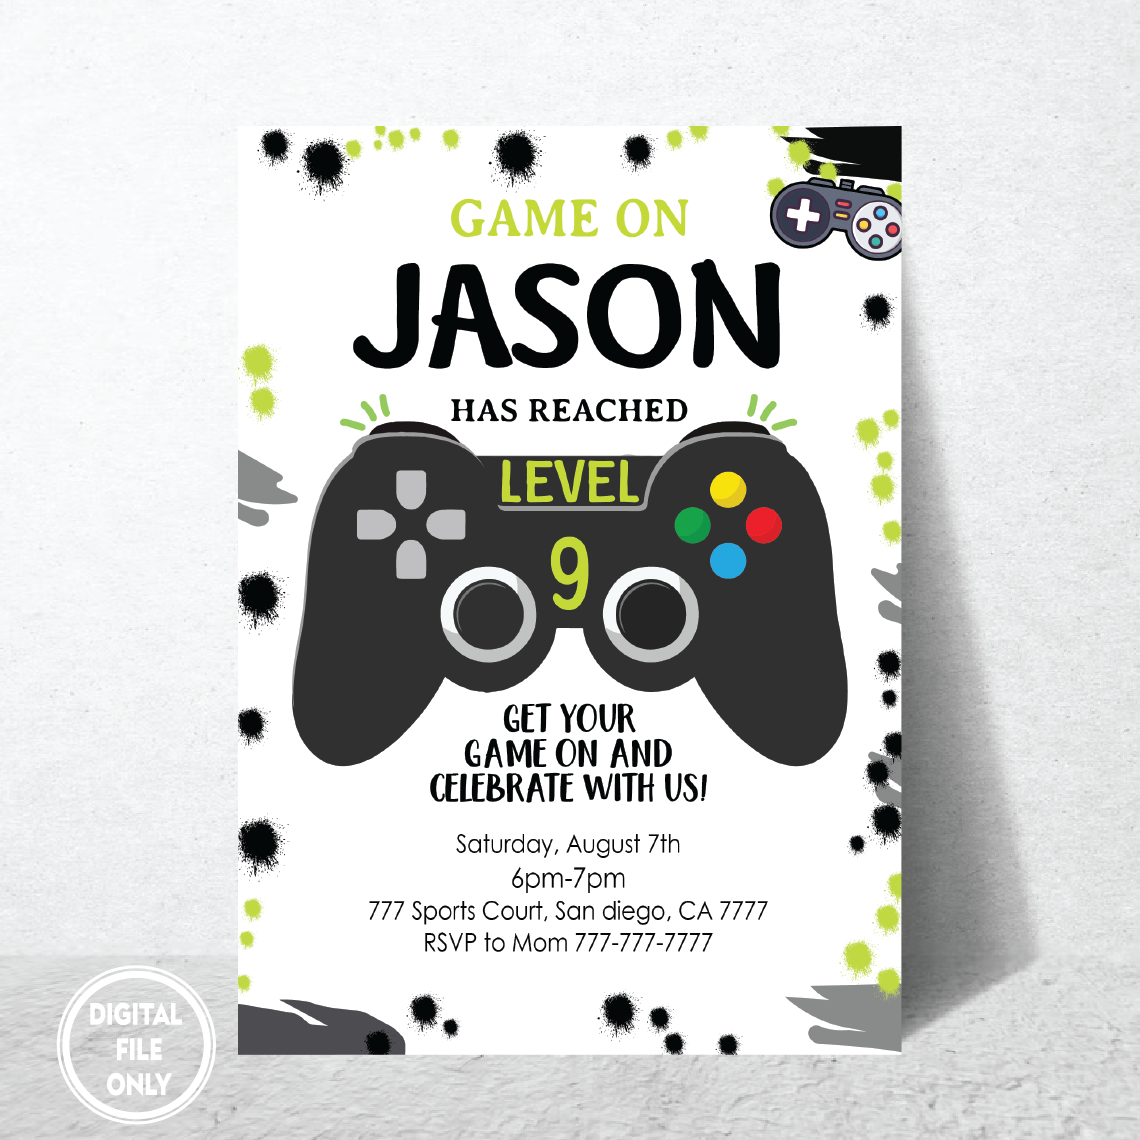 Personalized File Video Games Invitation PNG File Only, Video Games Invites Birthday Png, Instant Download Video Games Invitations